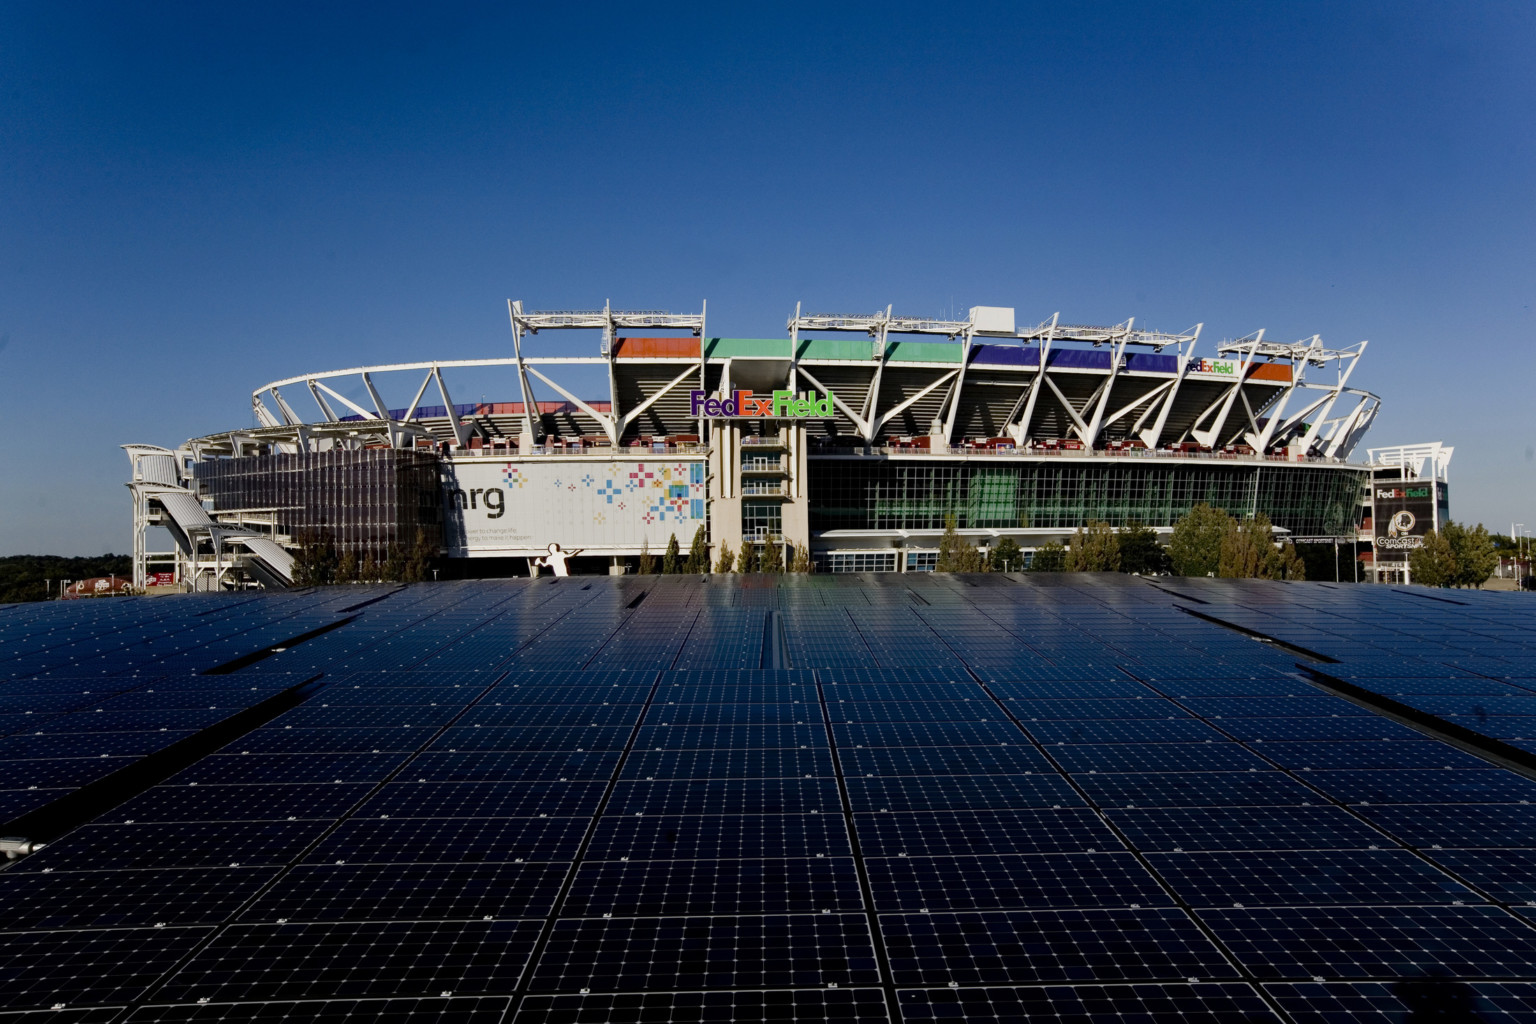 FedExField, home of the Washington Football Team, with largescale solar array before stadium with LED display, glass facade